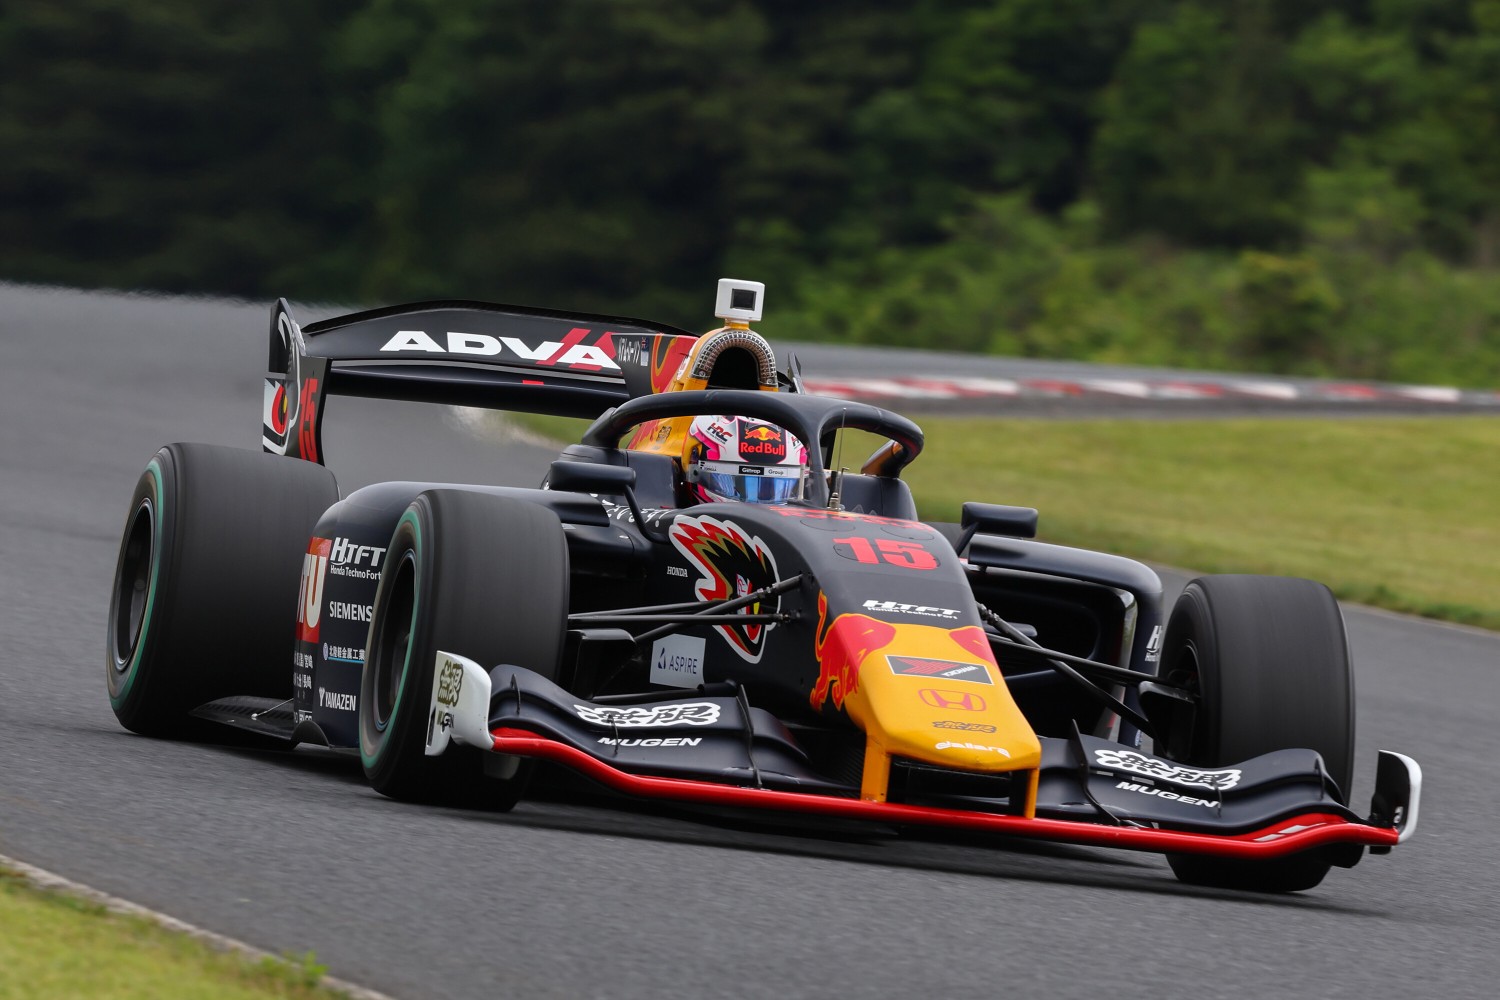 Liam Lawson #15 Team Mugen, during round four of the Japanese Super Formula Championship at Autopolis, on May 19-21, 2023. // Dutch Photo Agency / Red Bull Content Pool 